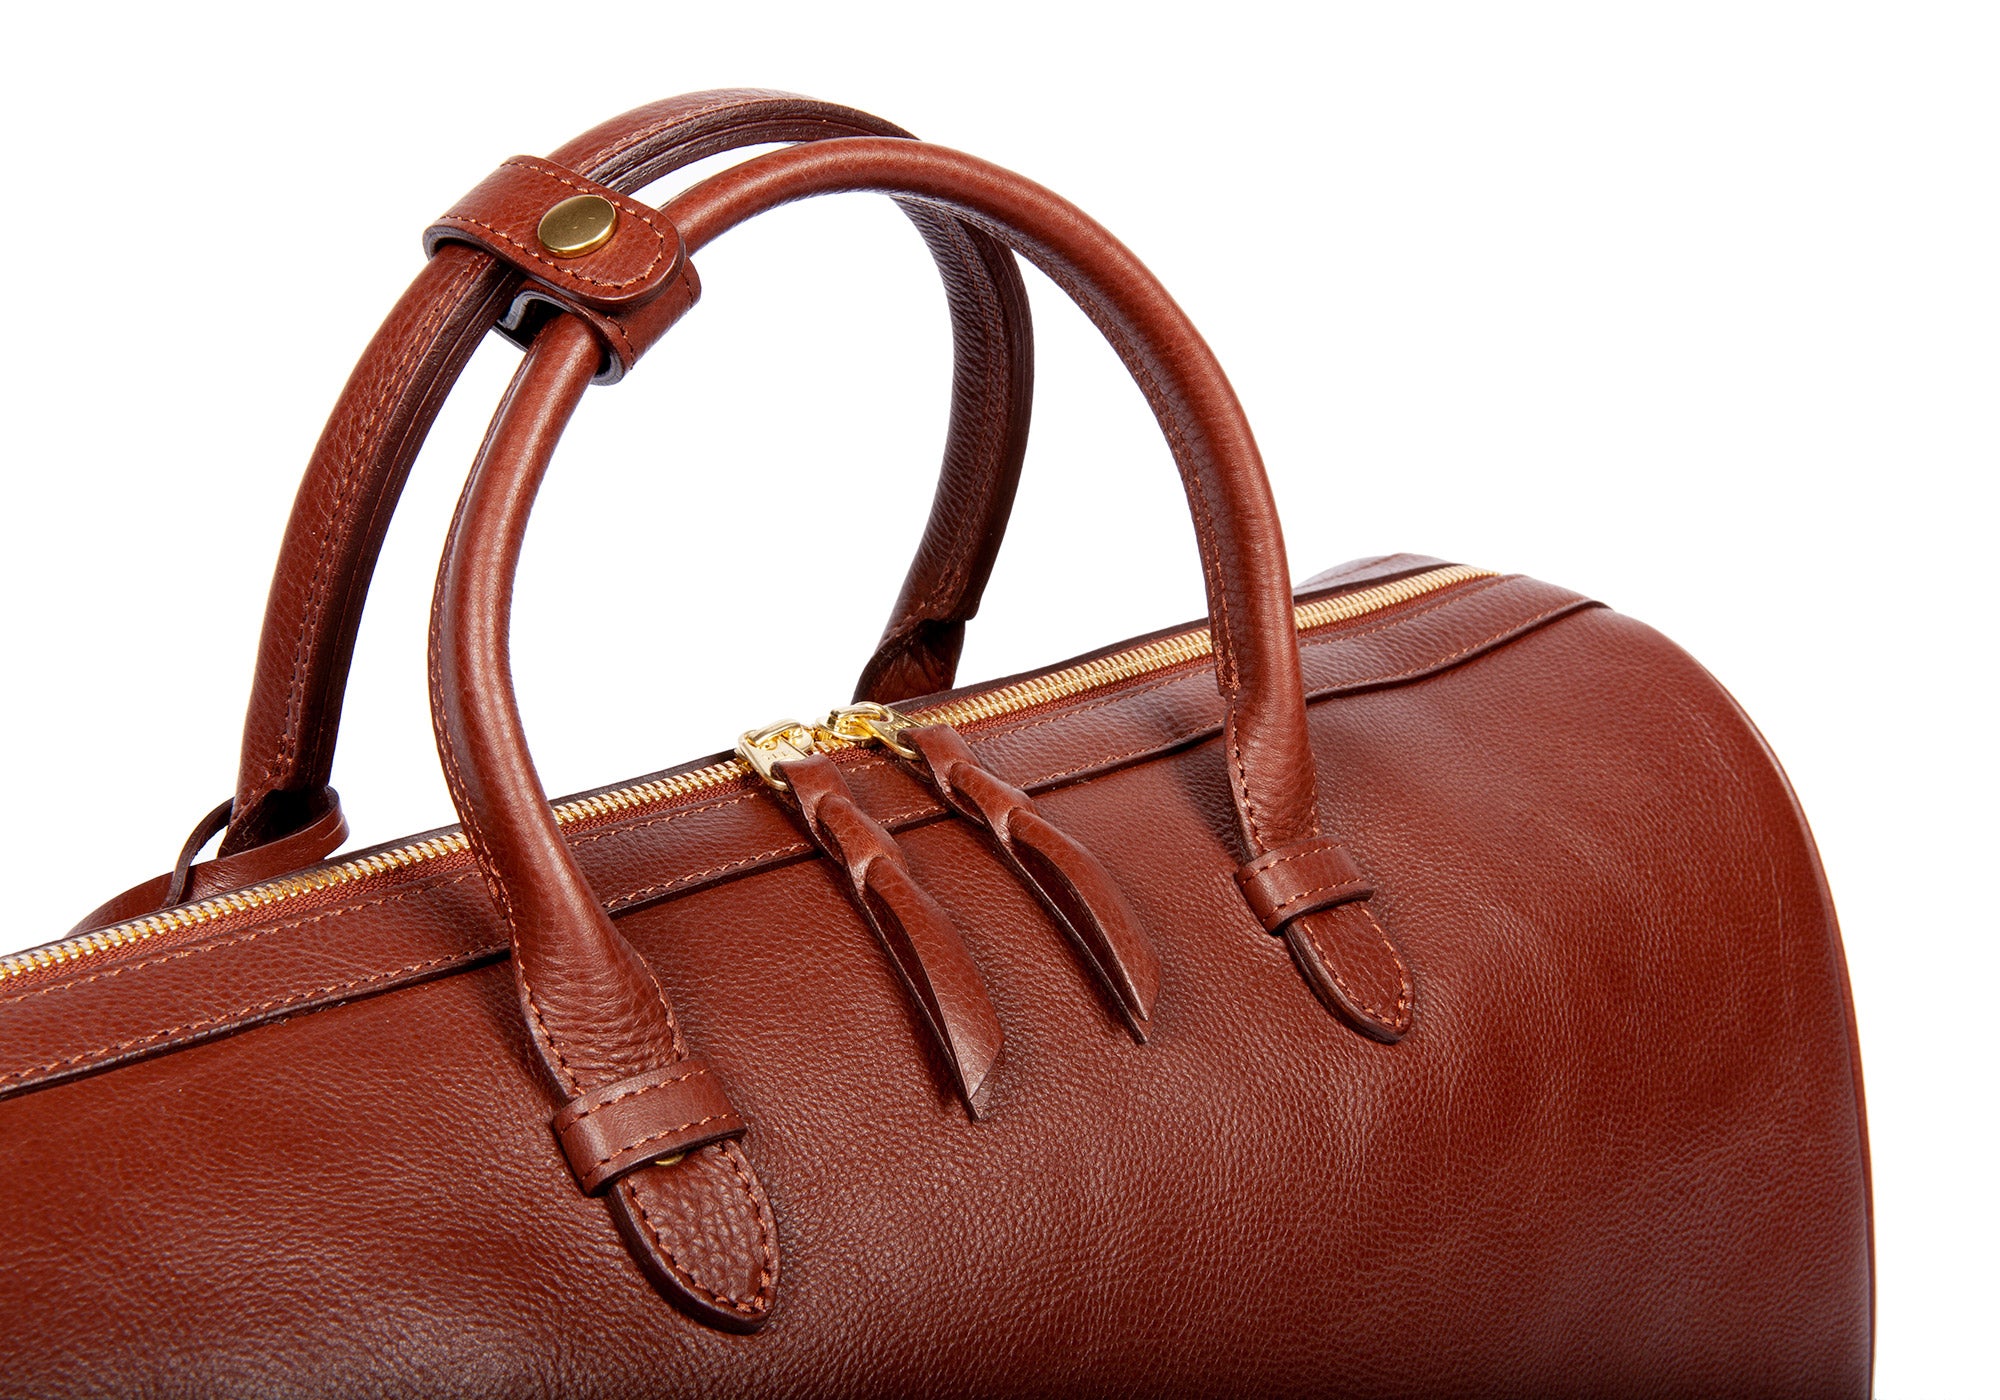 Mexico Duffle Bag, Light Brown Leather, Navy Lined, Butter Soft Leather